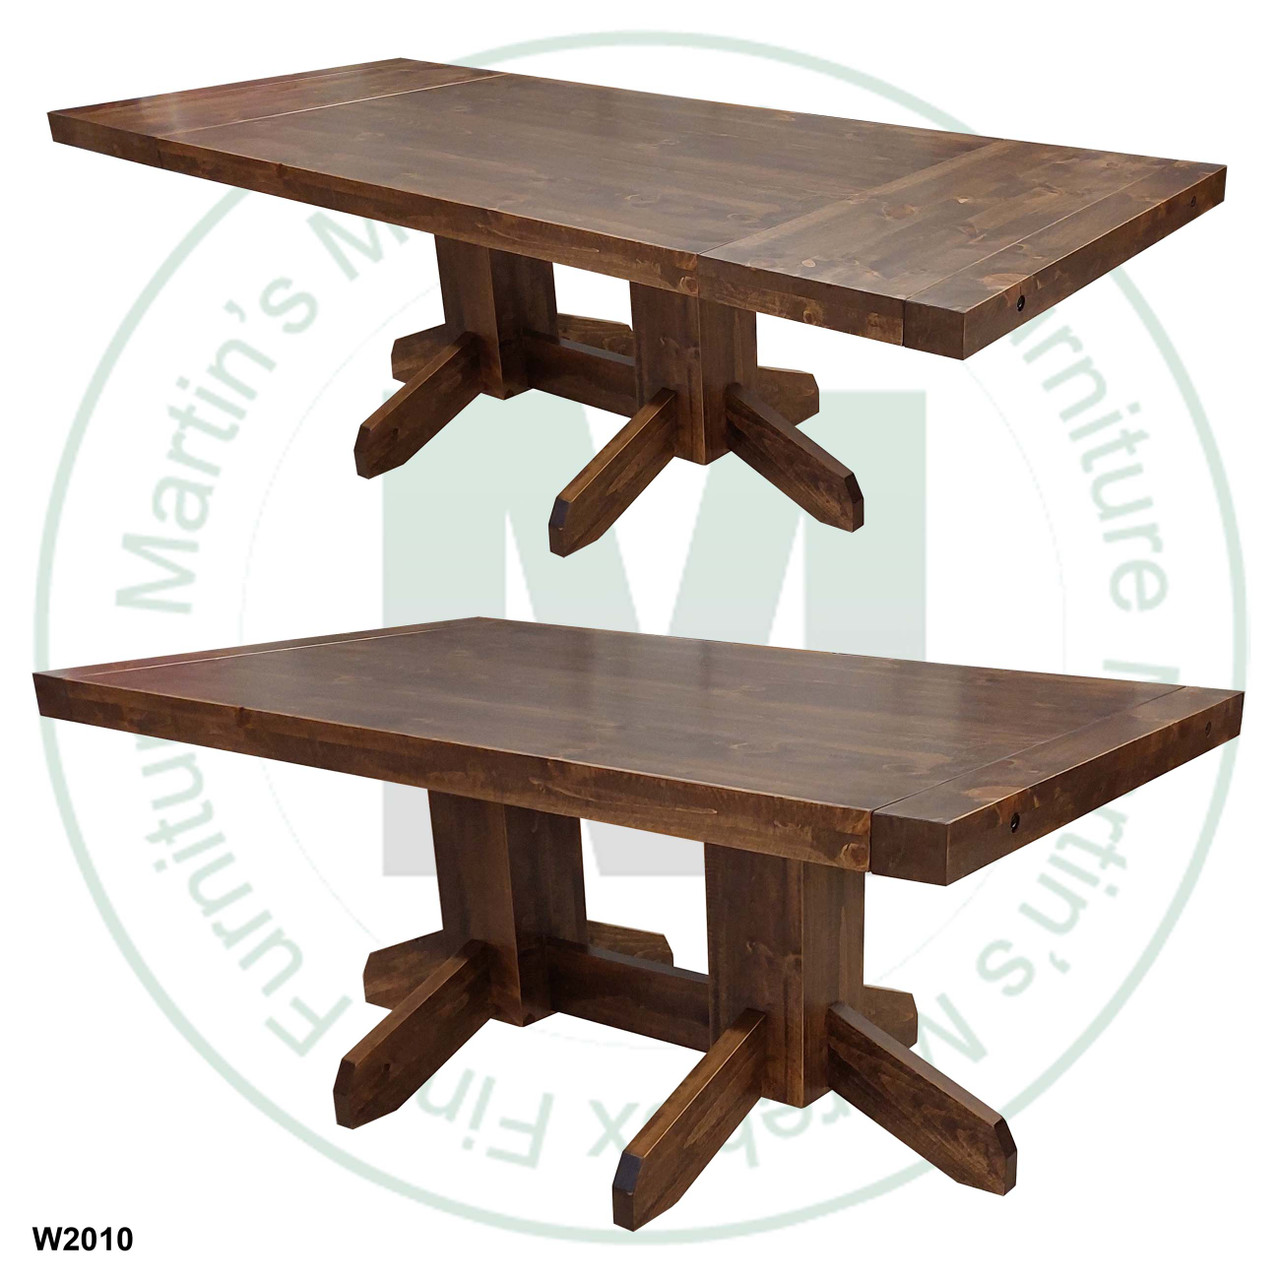 Maple Yukon Solid Top Double Pedestal Table 42'' Deep x 120'' Wide x 30'' High With 2 - 16'' End Leaves